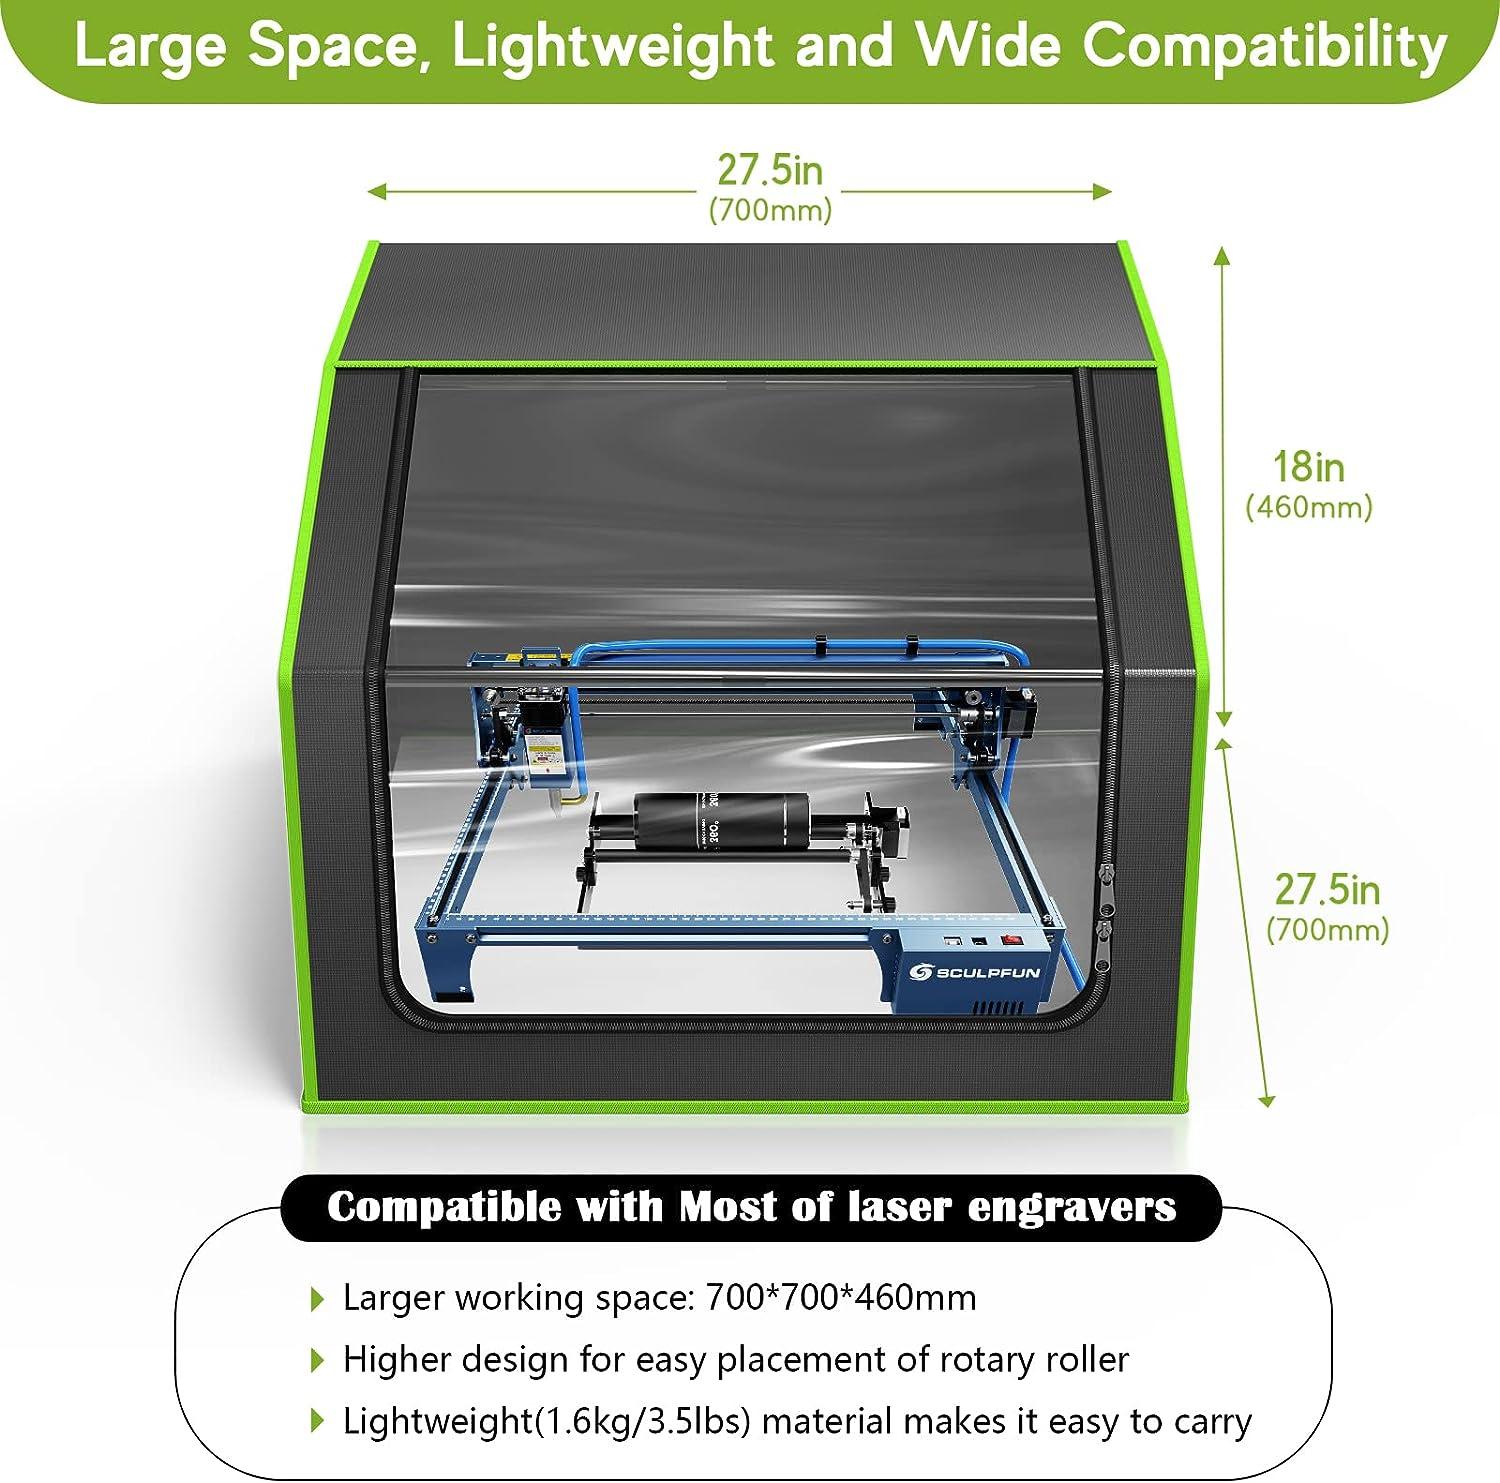 SCULPFUN S9 Laser Engraver with Laser Engraver Enclosure, 90W Effect High  Precision CNC Laser Cutter and Engraver Machine, Fireproof Laser Cutter